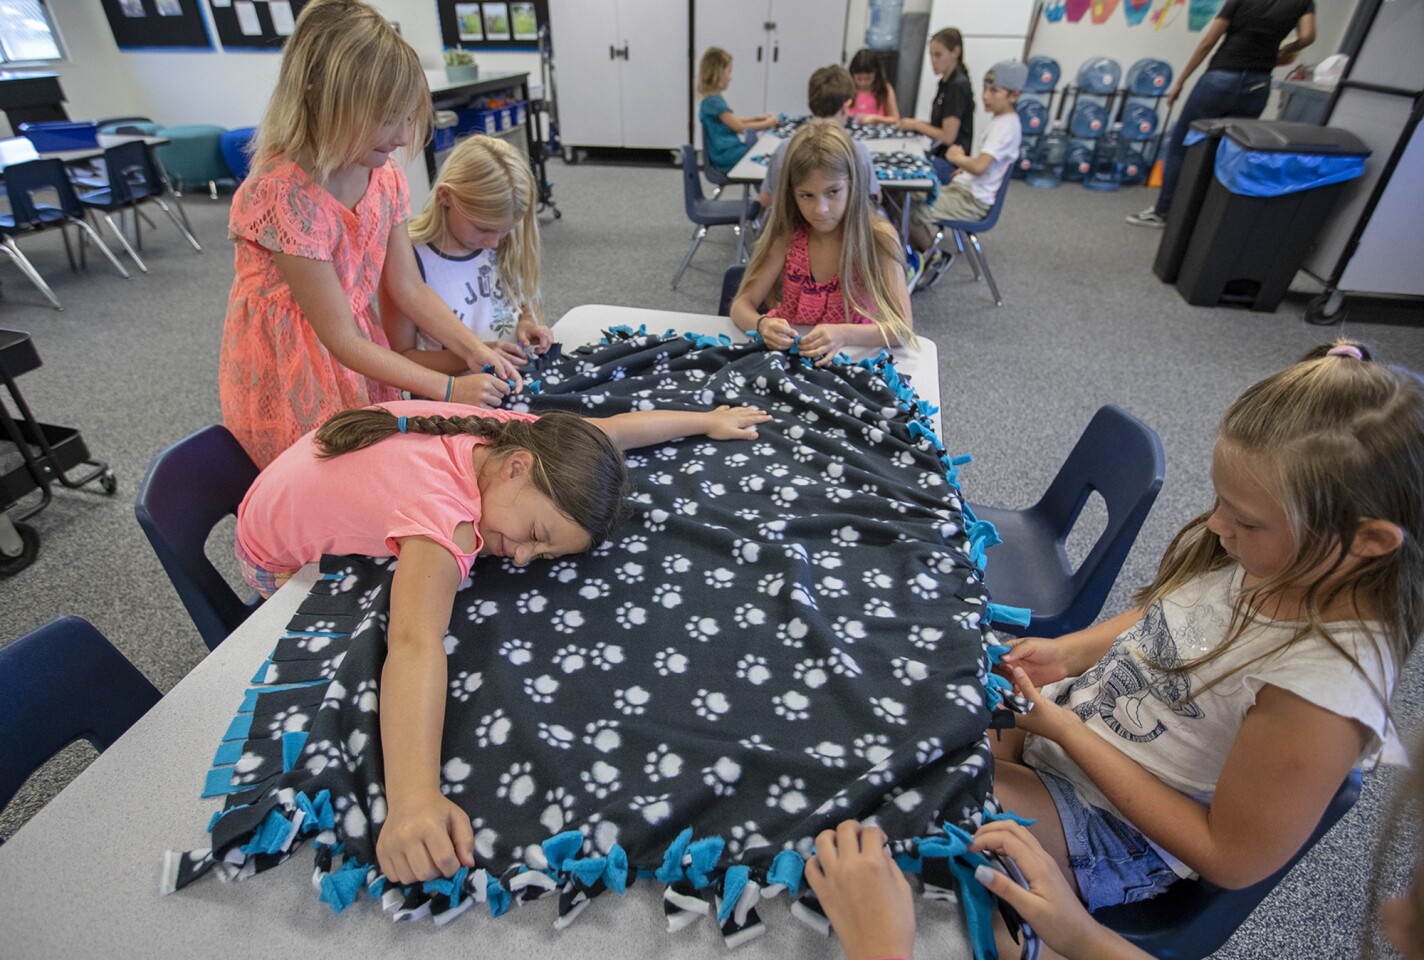 Zoe Presutto, 8, left, lies on a blanket at the YMCA child care at Agnes L. Smith Elementary School in Huntington Beach on Friday. She and other participants in the program made blankets for local animal shelters as part of the YMCA of Orange County program "100 Acts of Kindness."